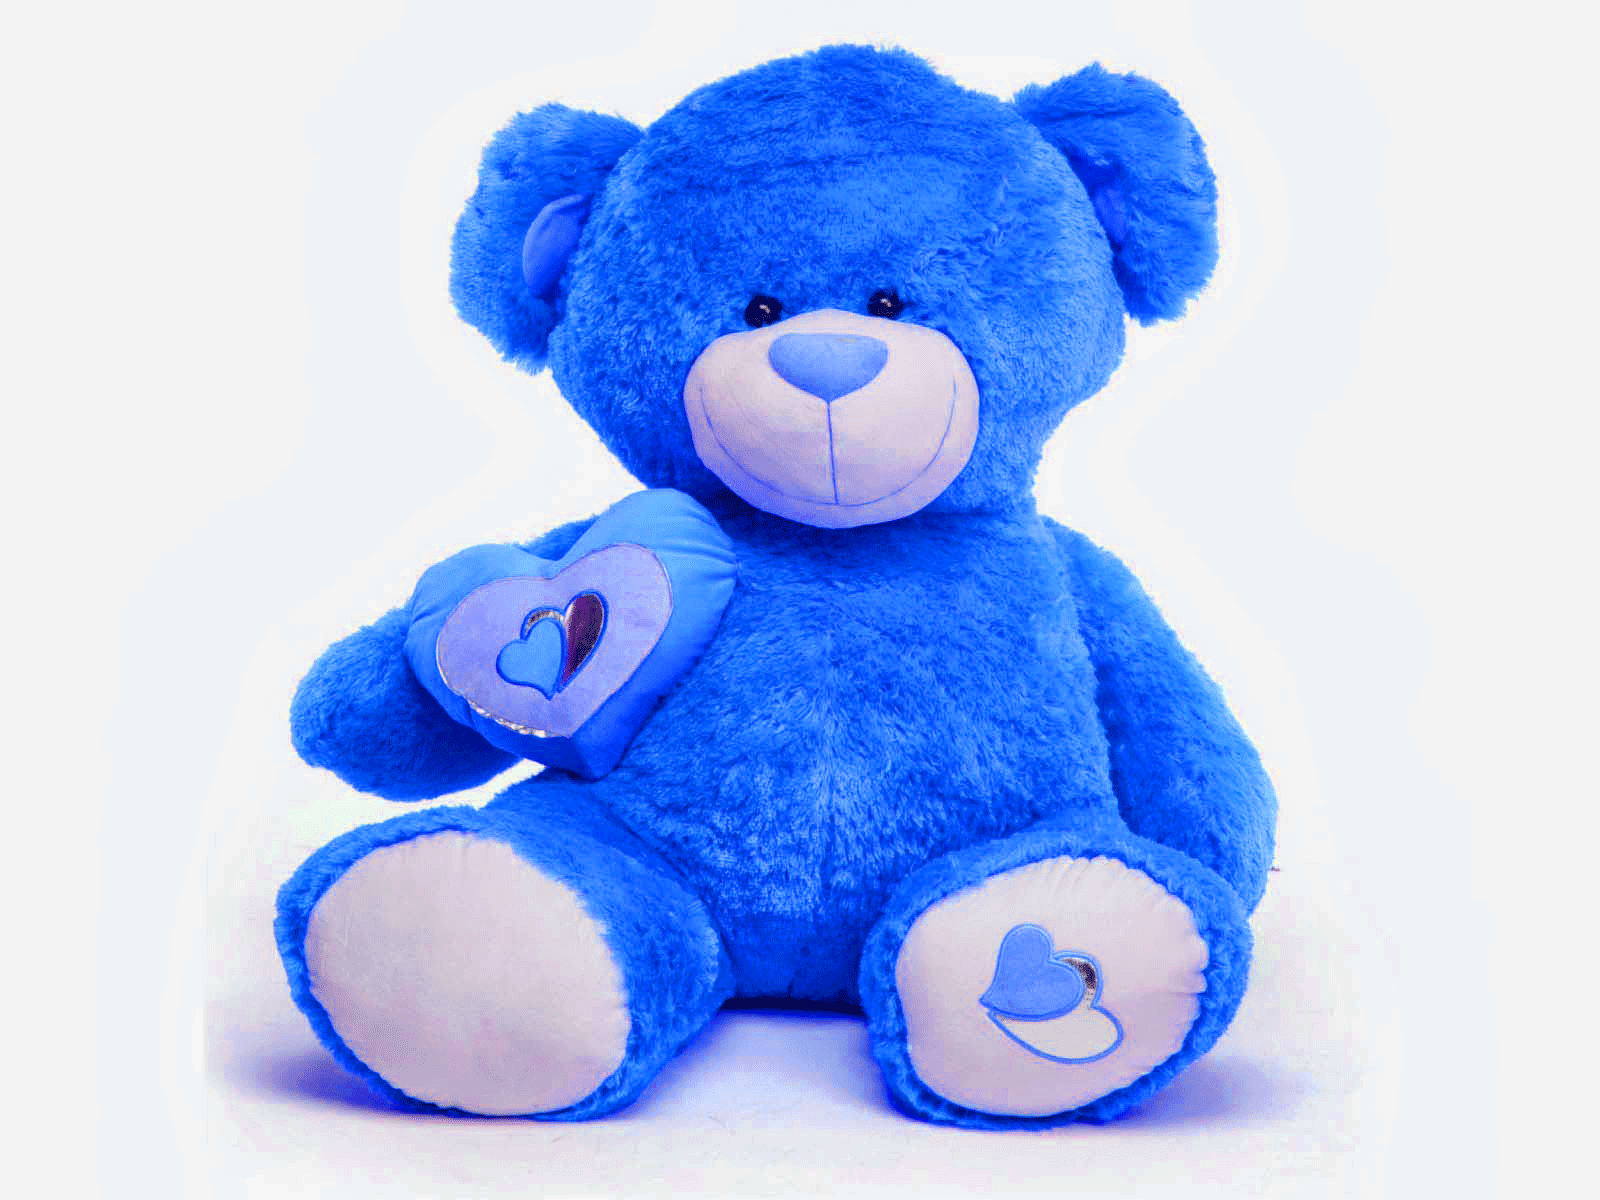 Blue Teddy Wallpapers - Wallpaper Cave